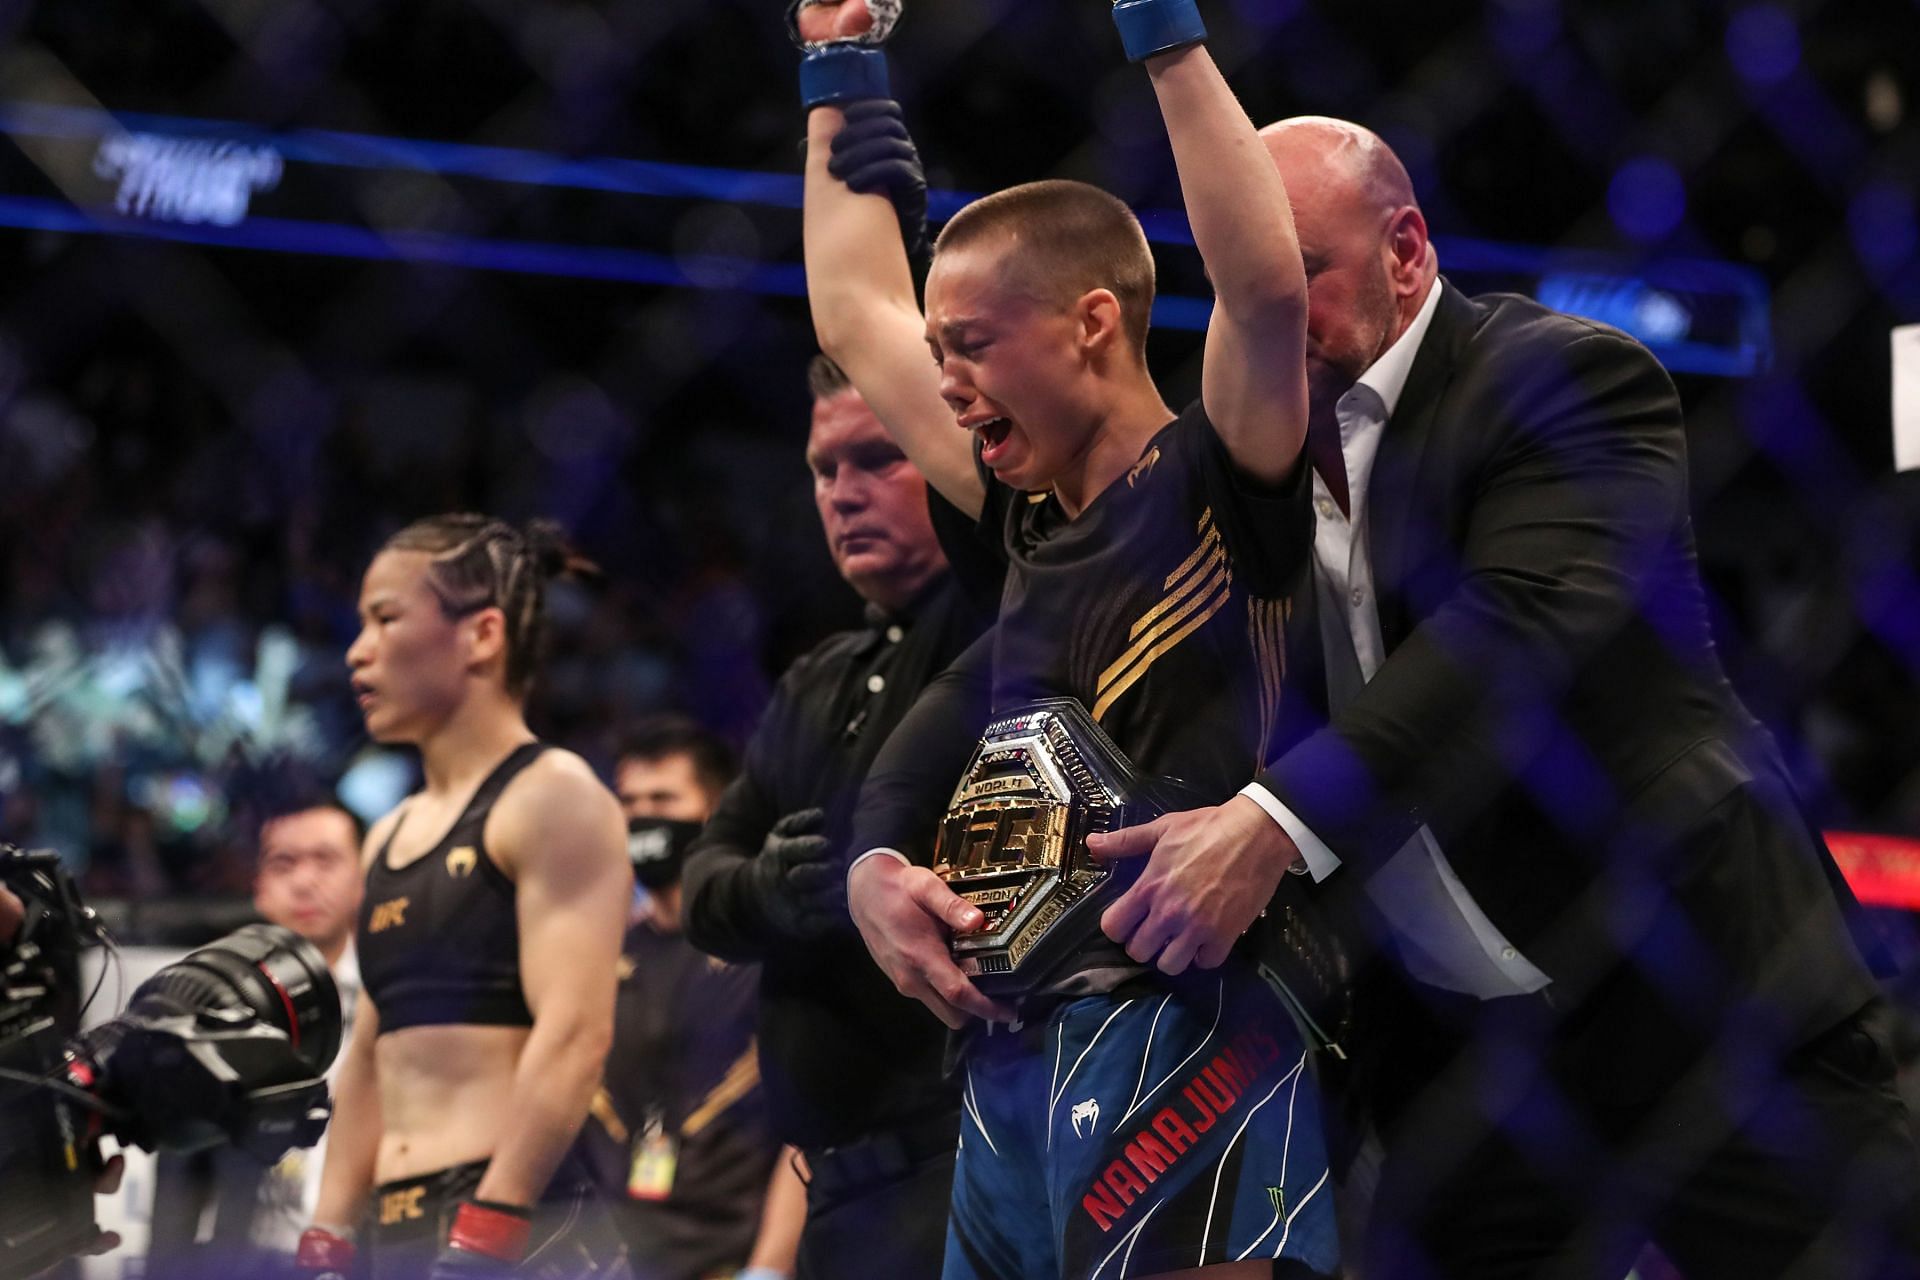 Zhang Weili (left) and Rose Namajunas (right) (Image via Getty)